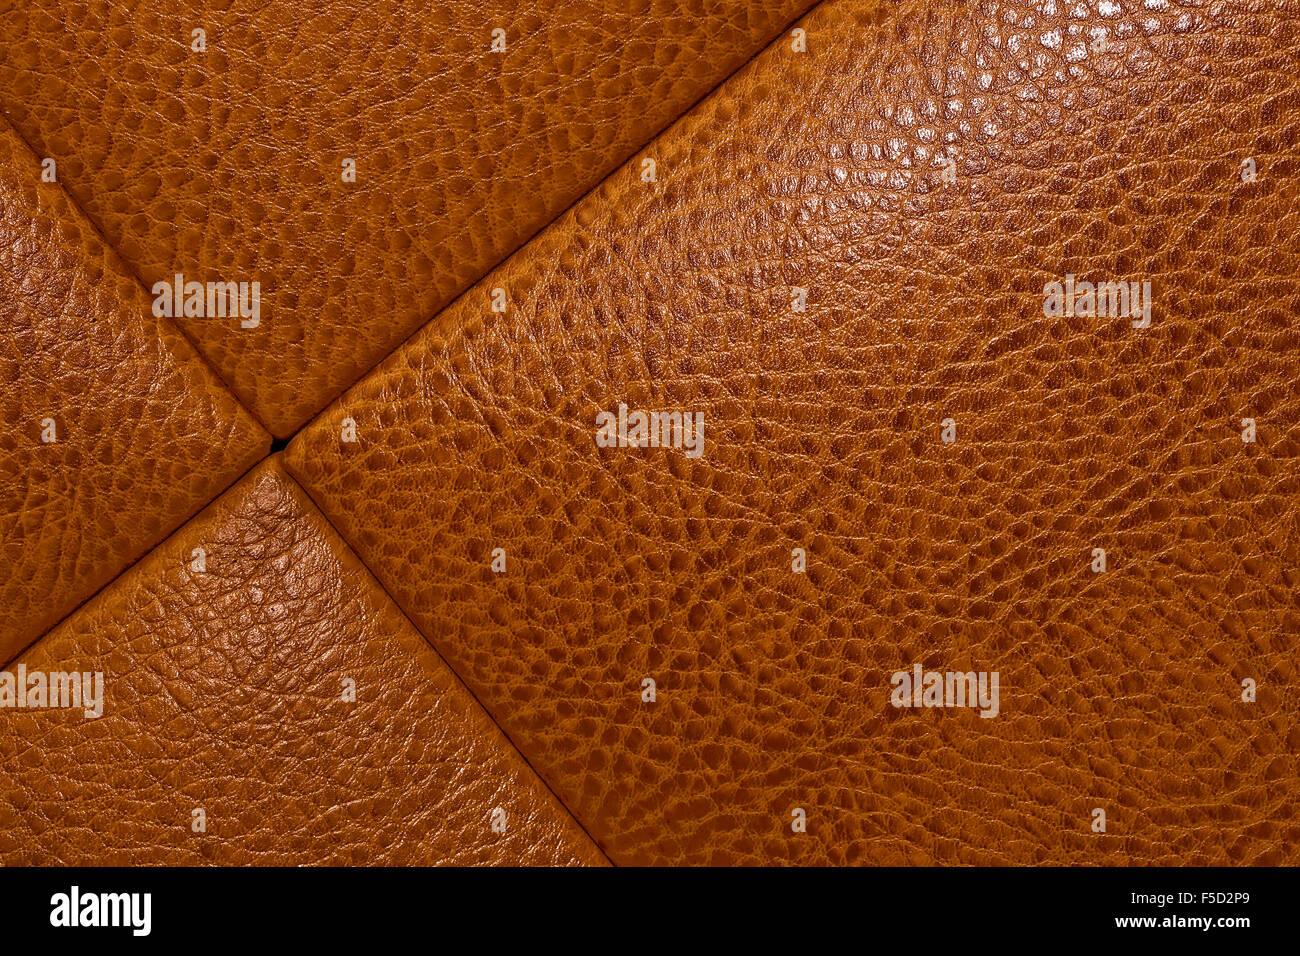 detail of brown leather Stock Photo